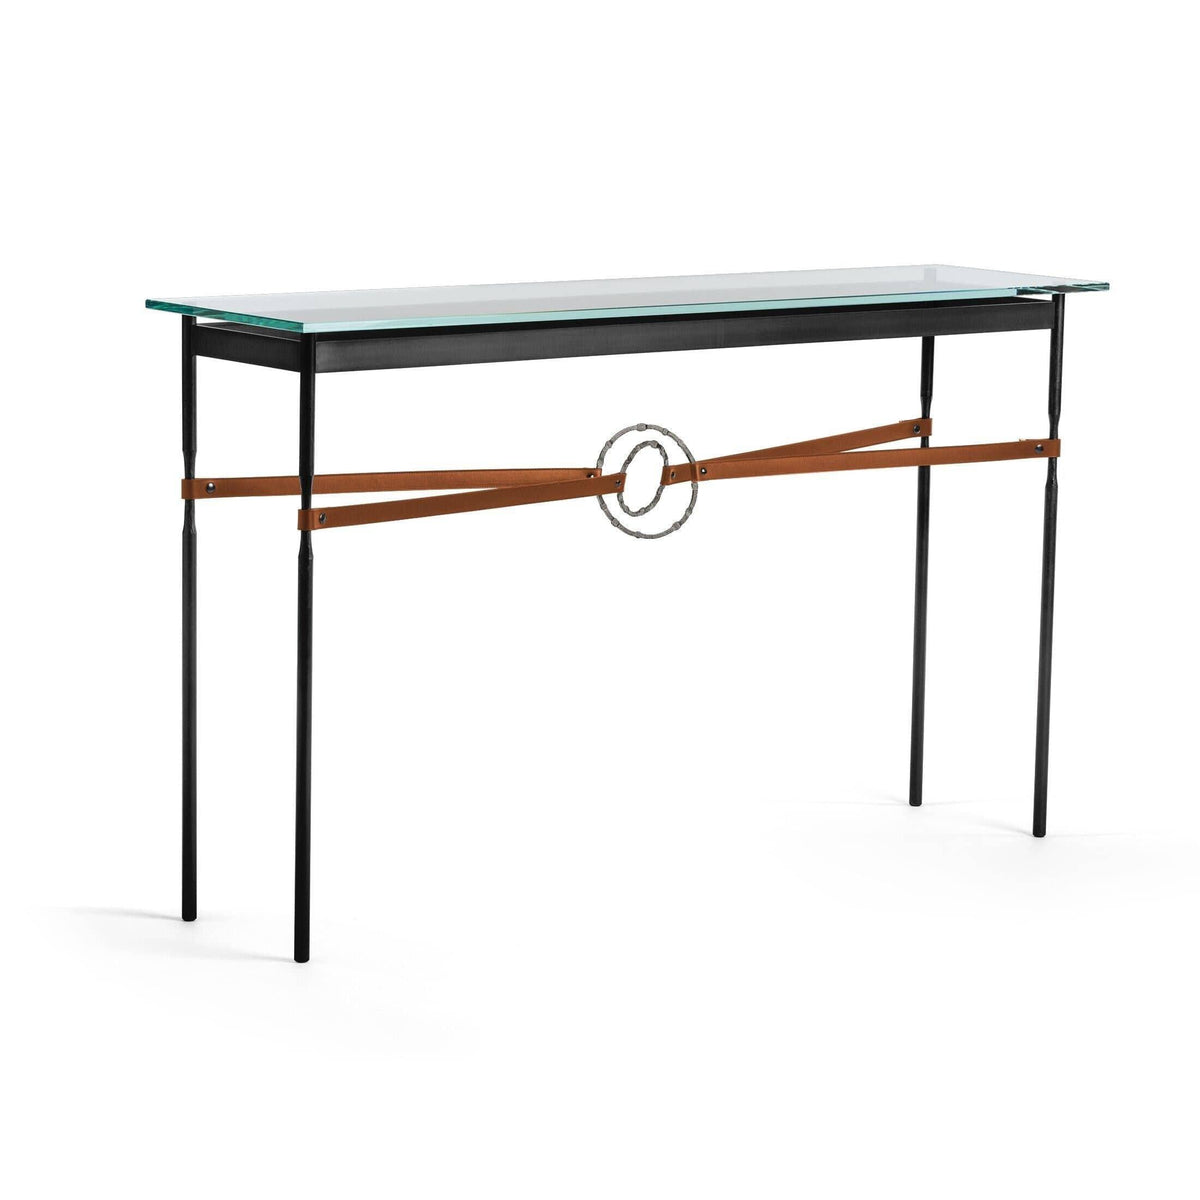 Hubbardton Forge - Equus Chestnut Leather Console Table - 750118-10-20-LC-VA0714 | Montreal Lighting & Hardware